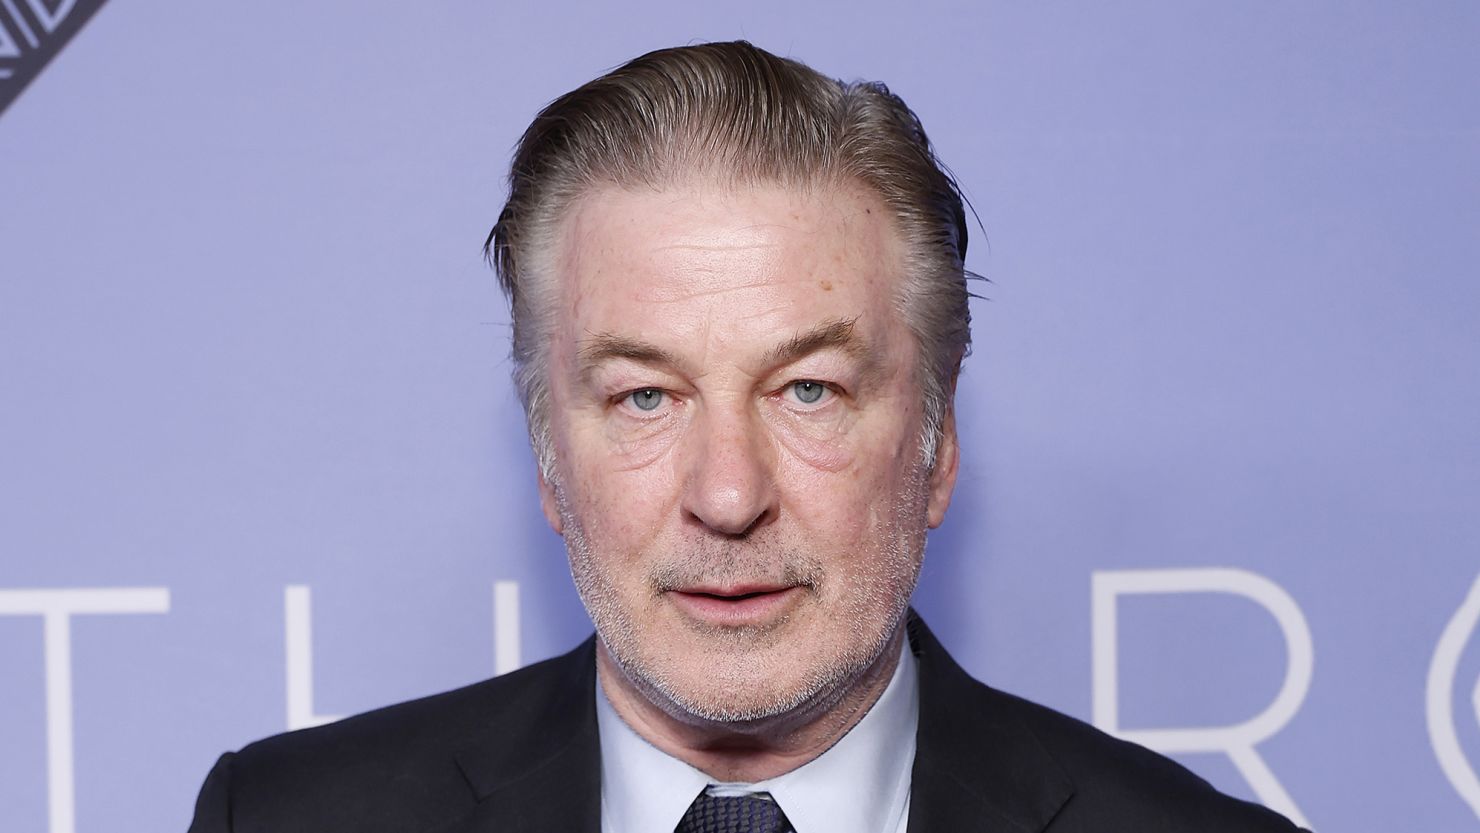 NEW YORK, NEW YORK - MARCH 06: Alec Baldwin attends The Roundabout Gala 2023 at The Ziegfeld Ballroom on March 06, 2023 in New York City. (Photo by John Lamparski/Getty Images)